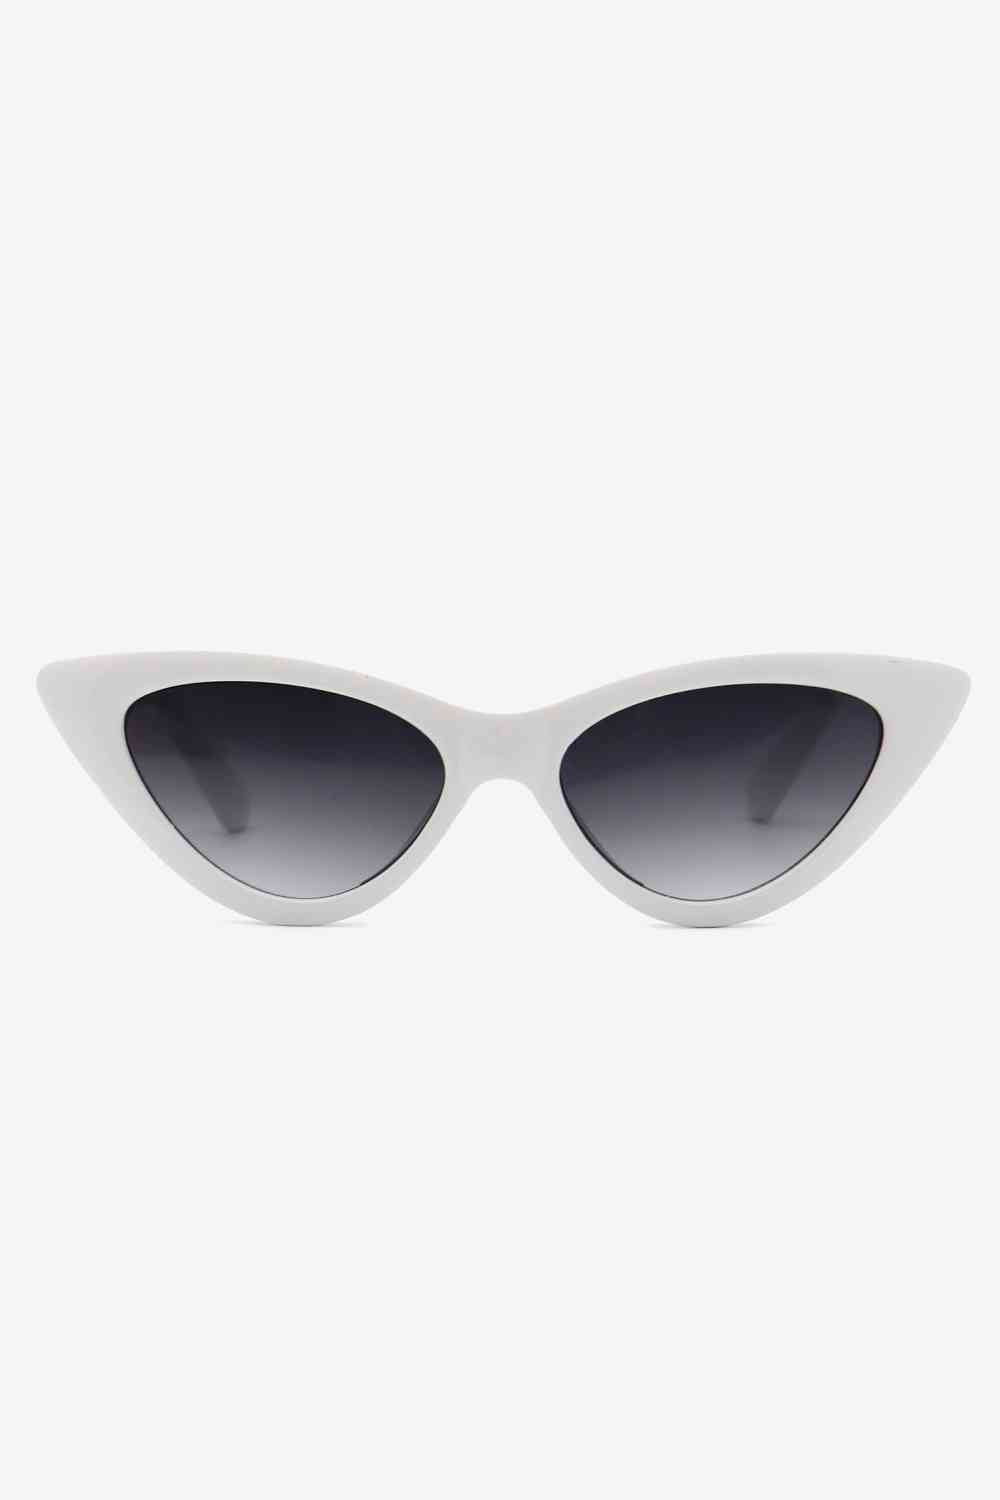 Chain Detail Cat-Eye Sunglasses Print on any thing USA/STOD clothes